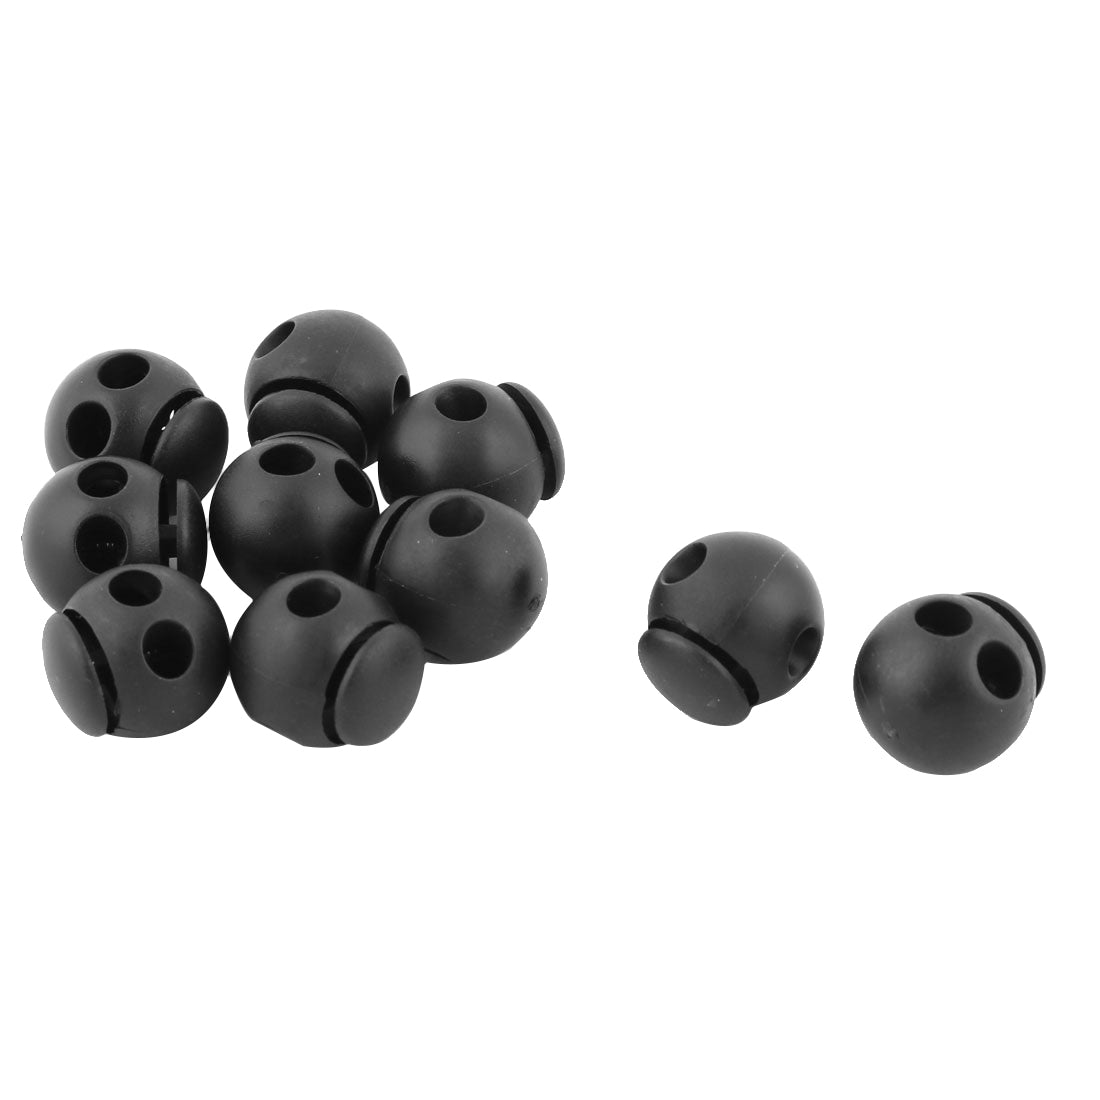 uxcell Uxcell Clothing Plastic Double Hole Toggle Stopper Cord Adjustive Lock Black 10 Pcs